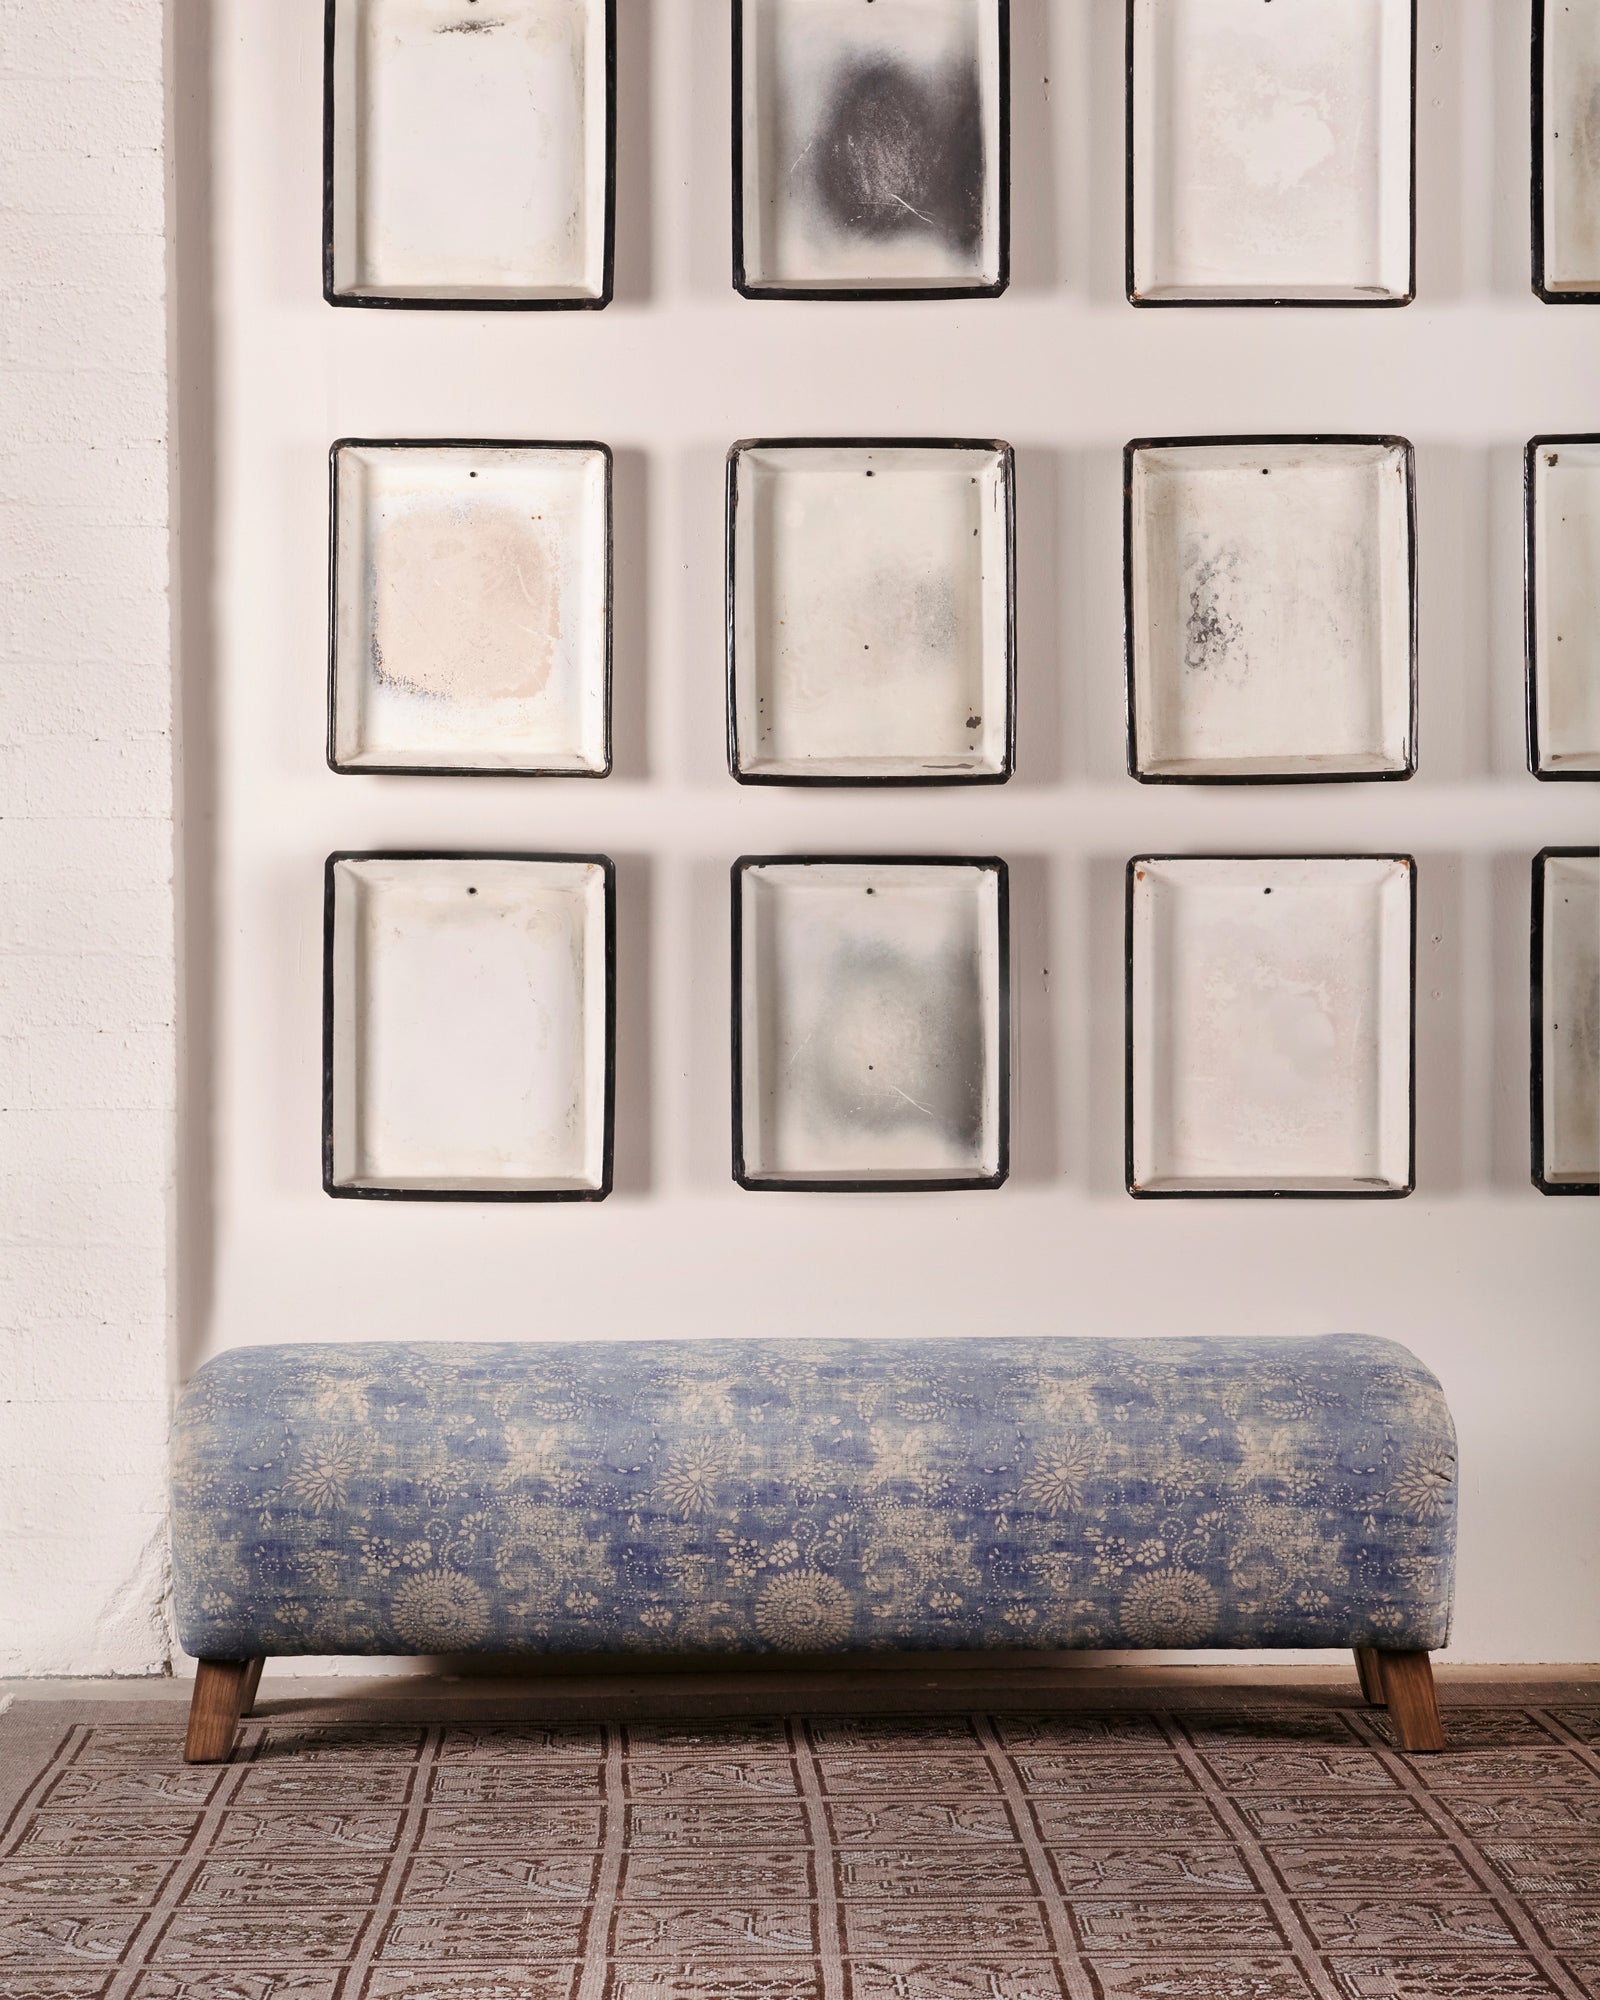  Mason bench in Mariko Indigo. In the background are multiple frames that hangs on a white wall. Photographed in Mariko Indigo 